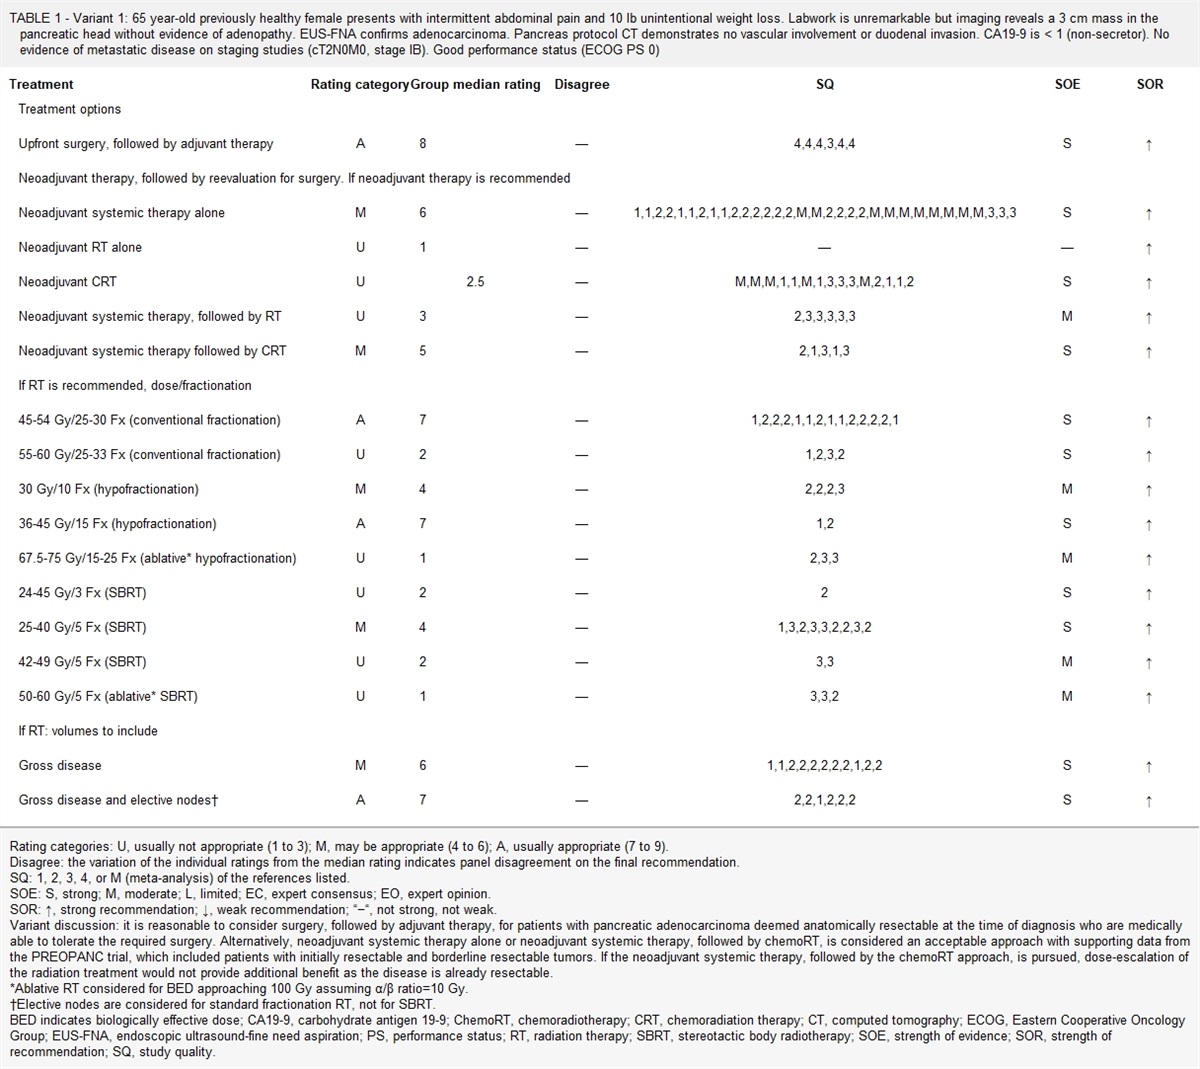 Executive Summary of the American Radium Society Appropriate Use Criteria for Neoadjuvant Therapy for Nonmetastatic Pancreatic Adenocarcinoma: Systematic Review and Guidelines